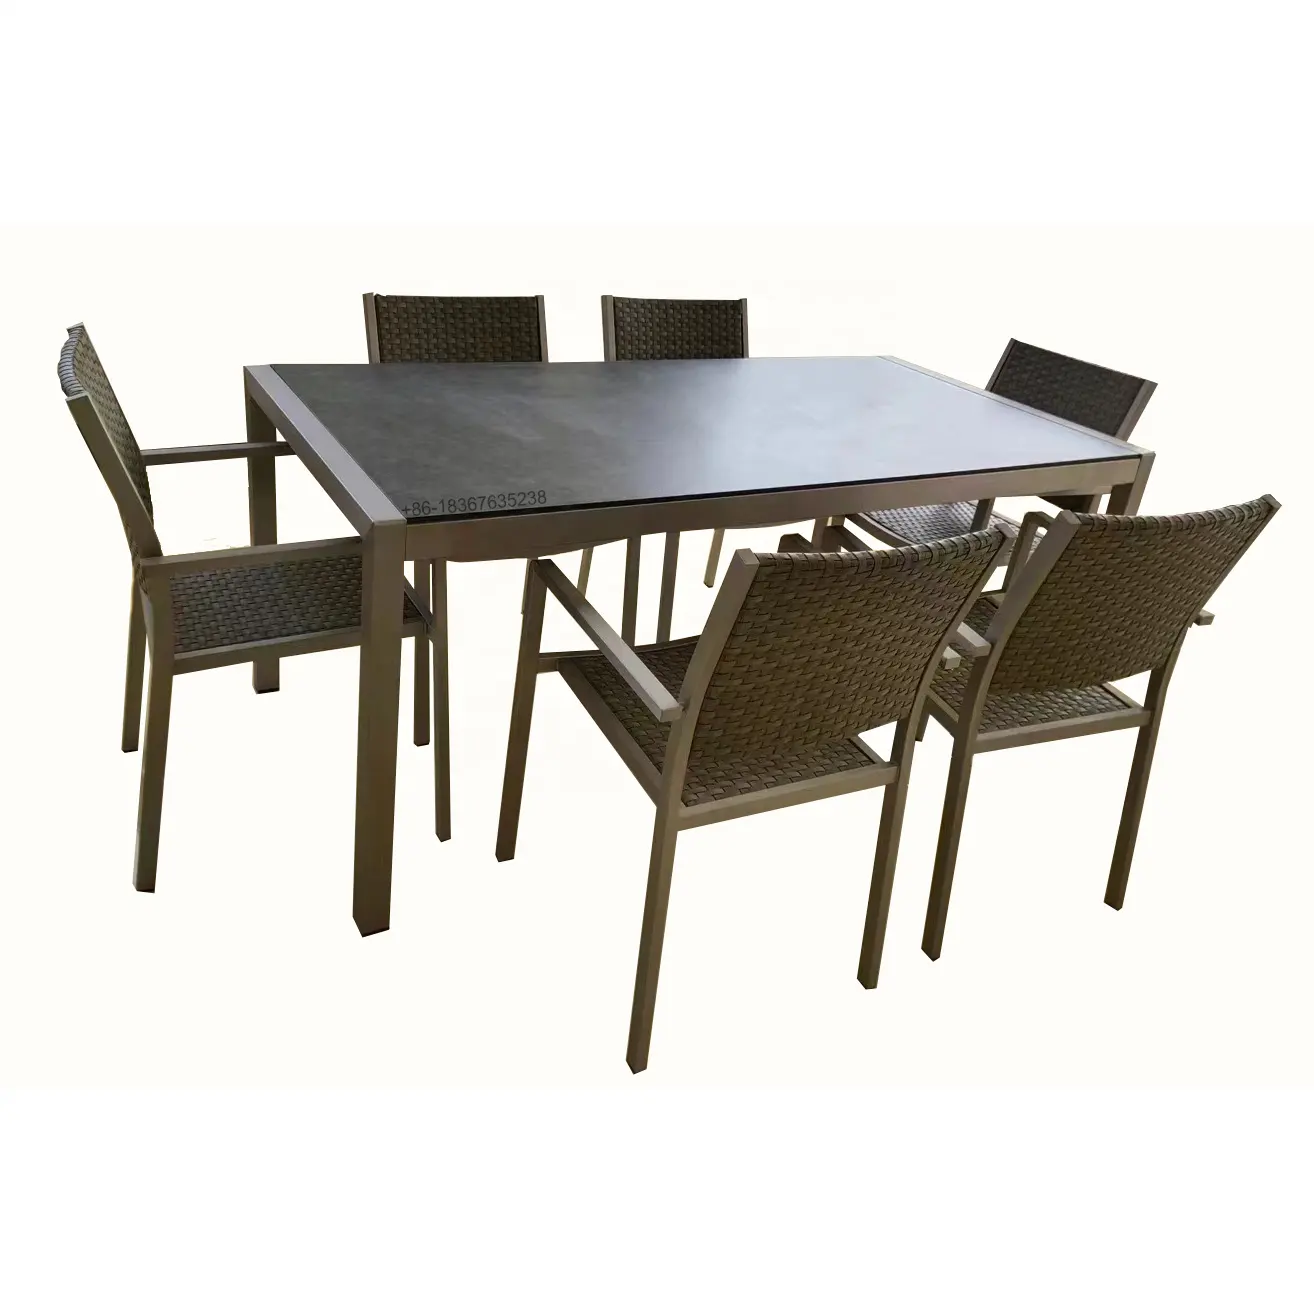 luxury garden patio outdoor aluminum furniture glass dining table 6 chairs set